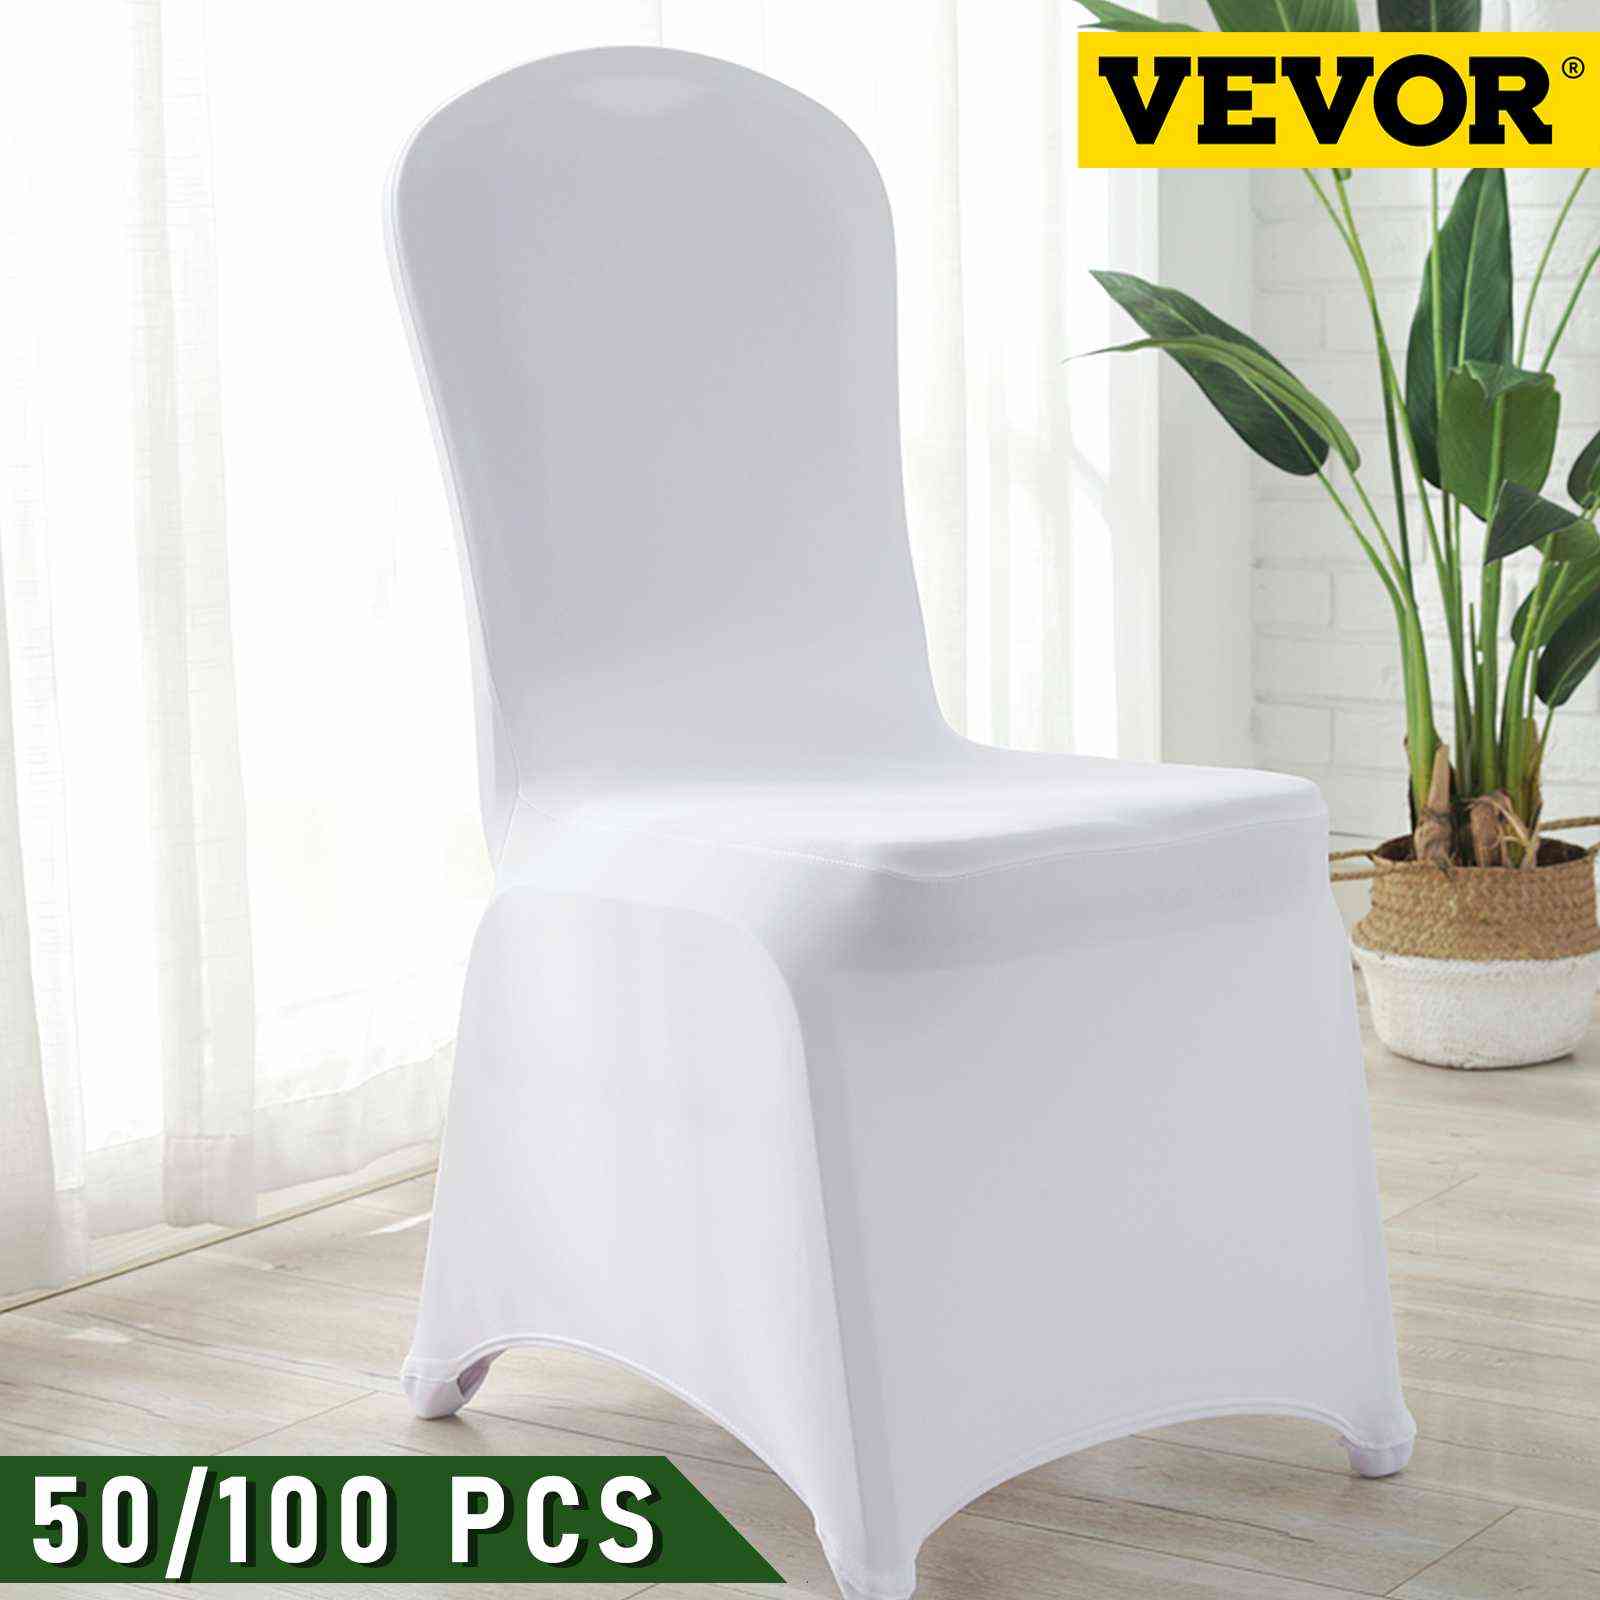 

VEVOR 50 100Pcs Wedding Chair Covers Spandex Stretch Slipcover for Restaurant Banquet el Dining Party Universal Cover 211105